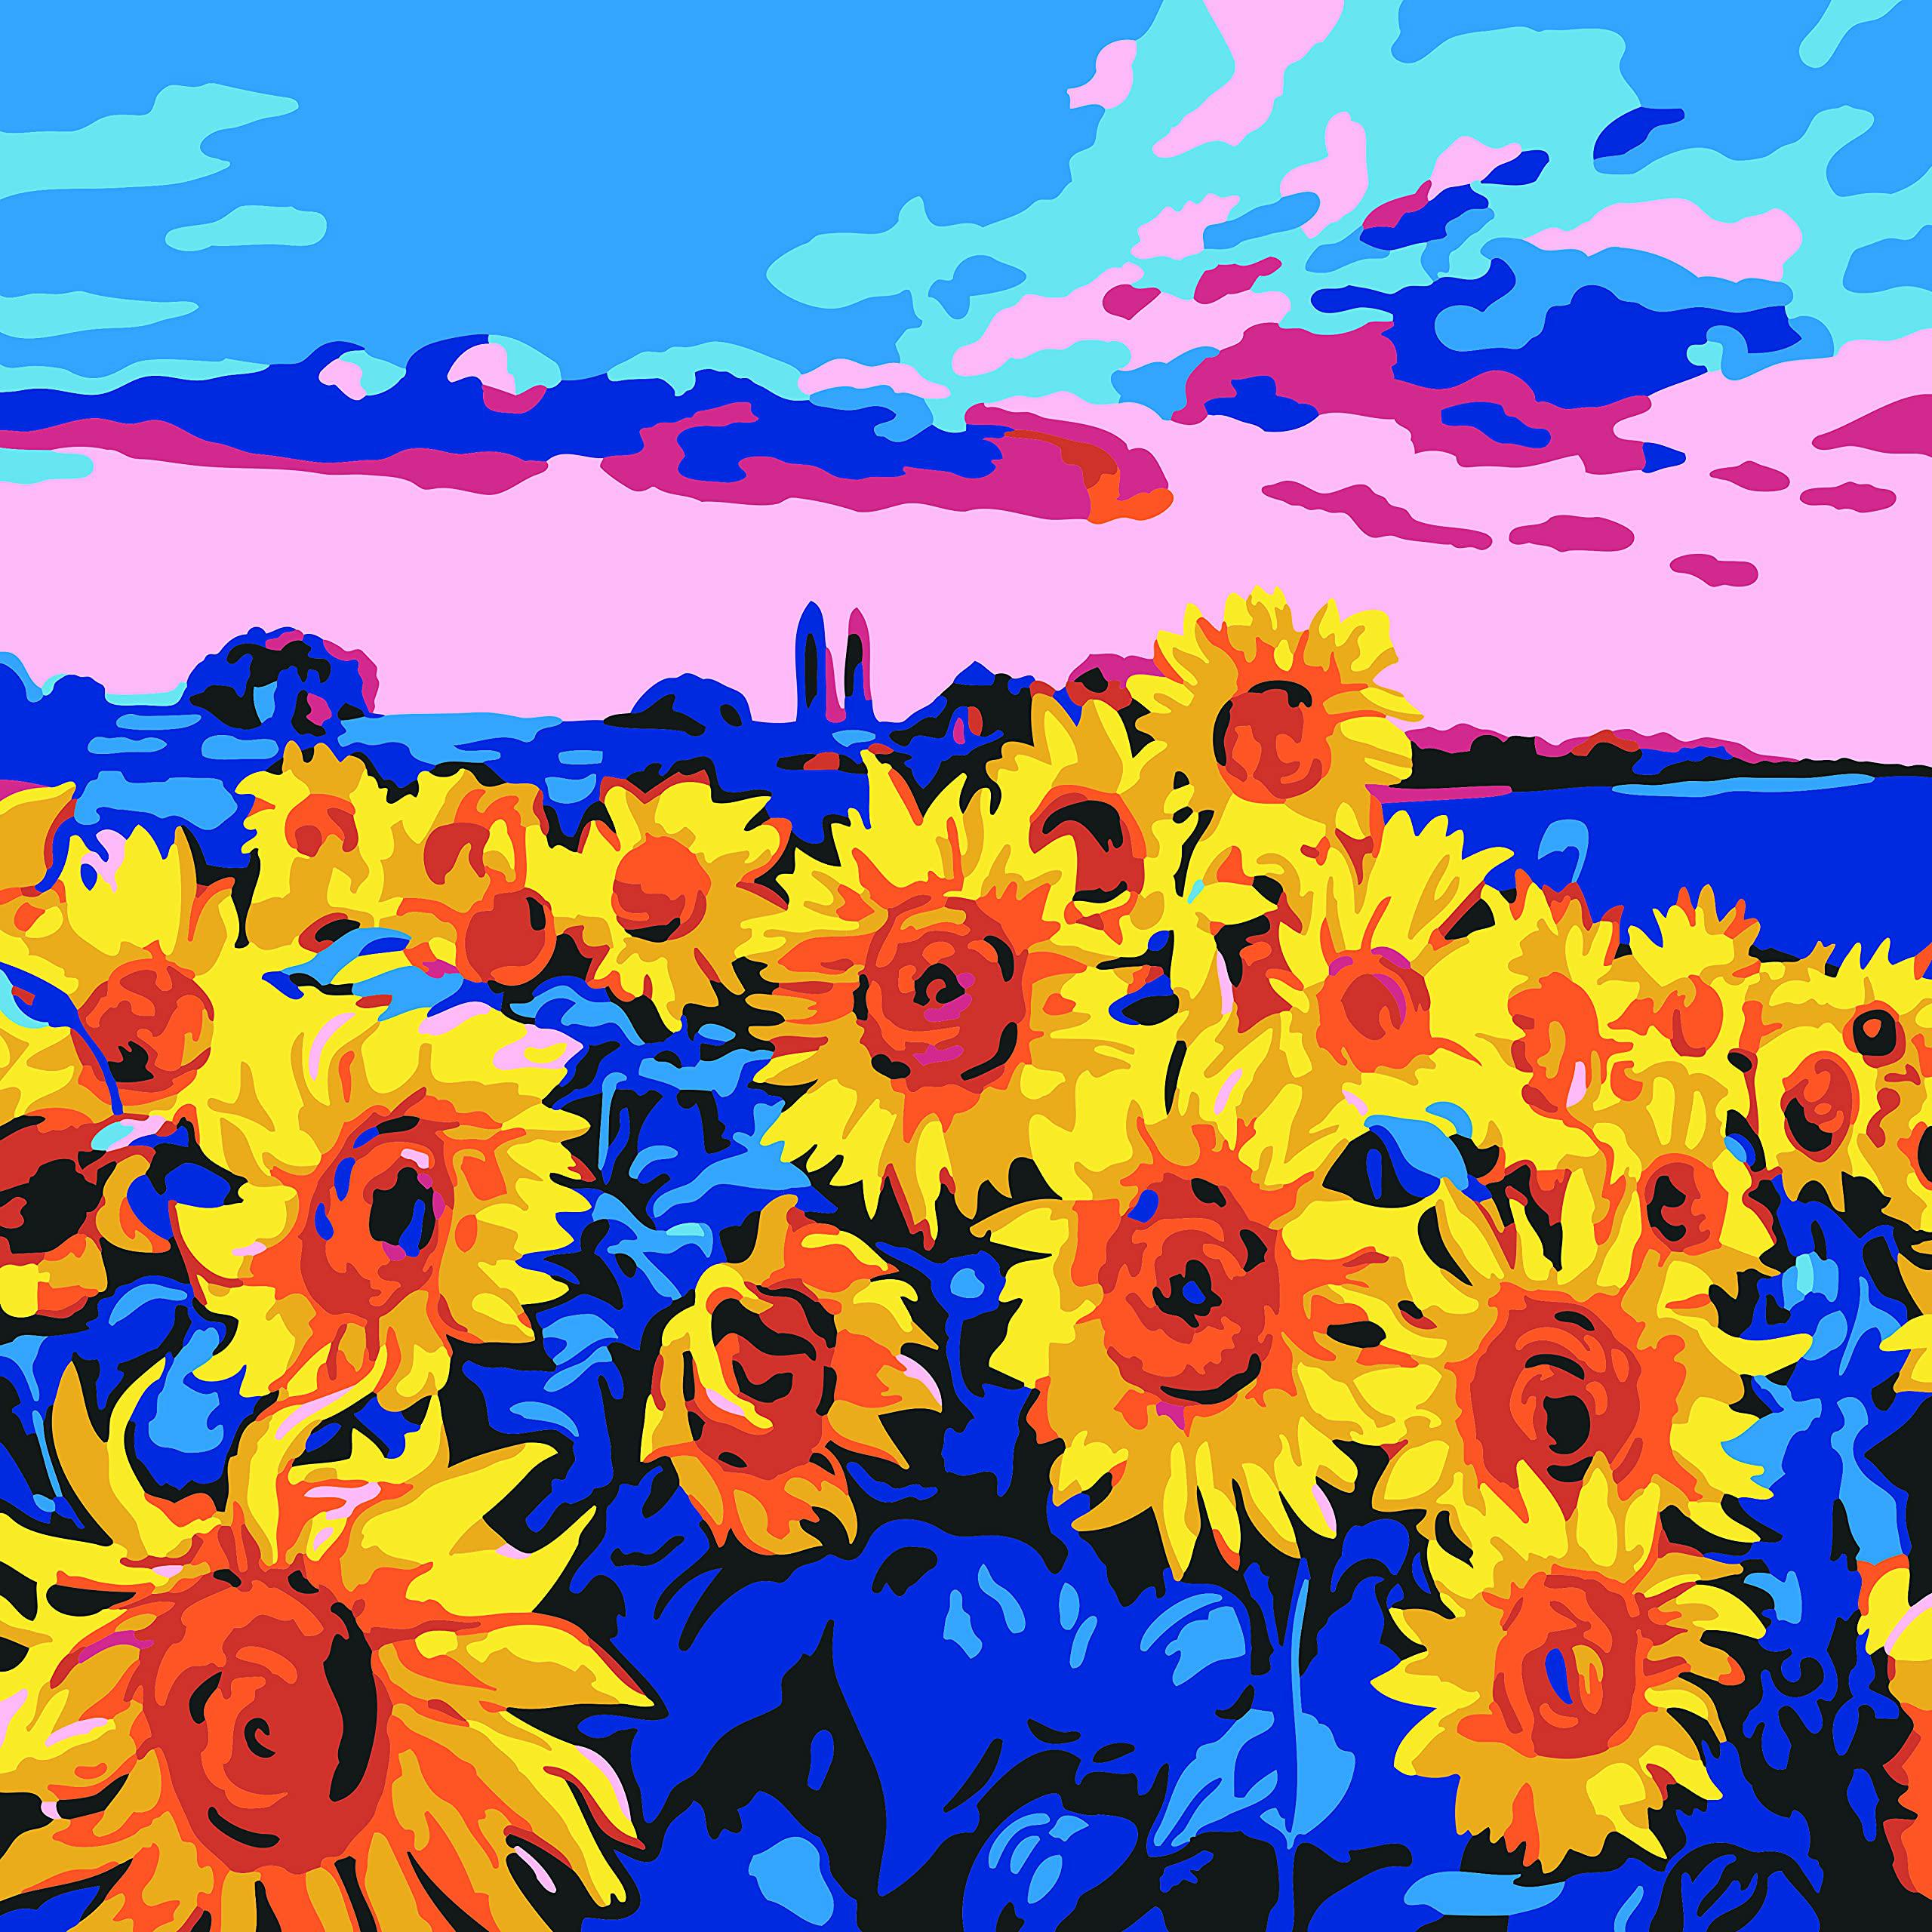 plaid sunflower meadow modern kit, 14" x 14" paint by numbers for adults and kids, easy-to-follow diy crafts, art supplies wi